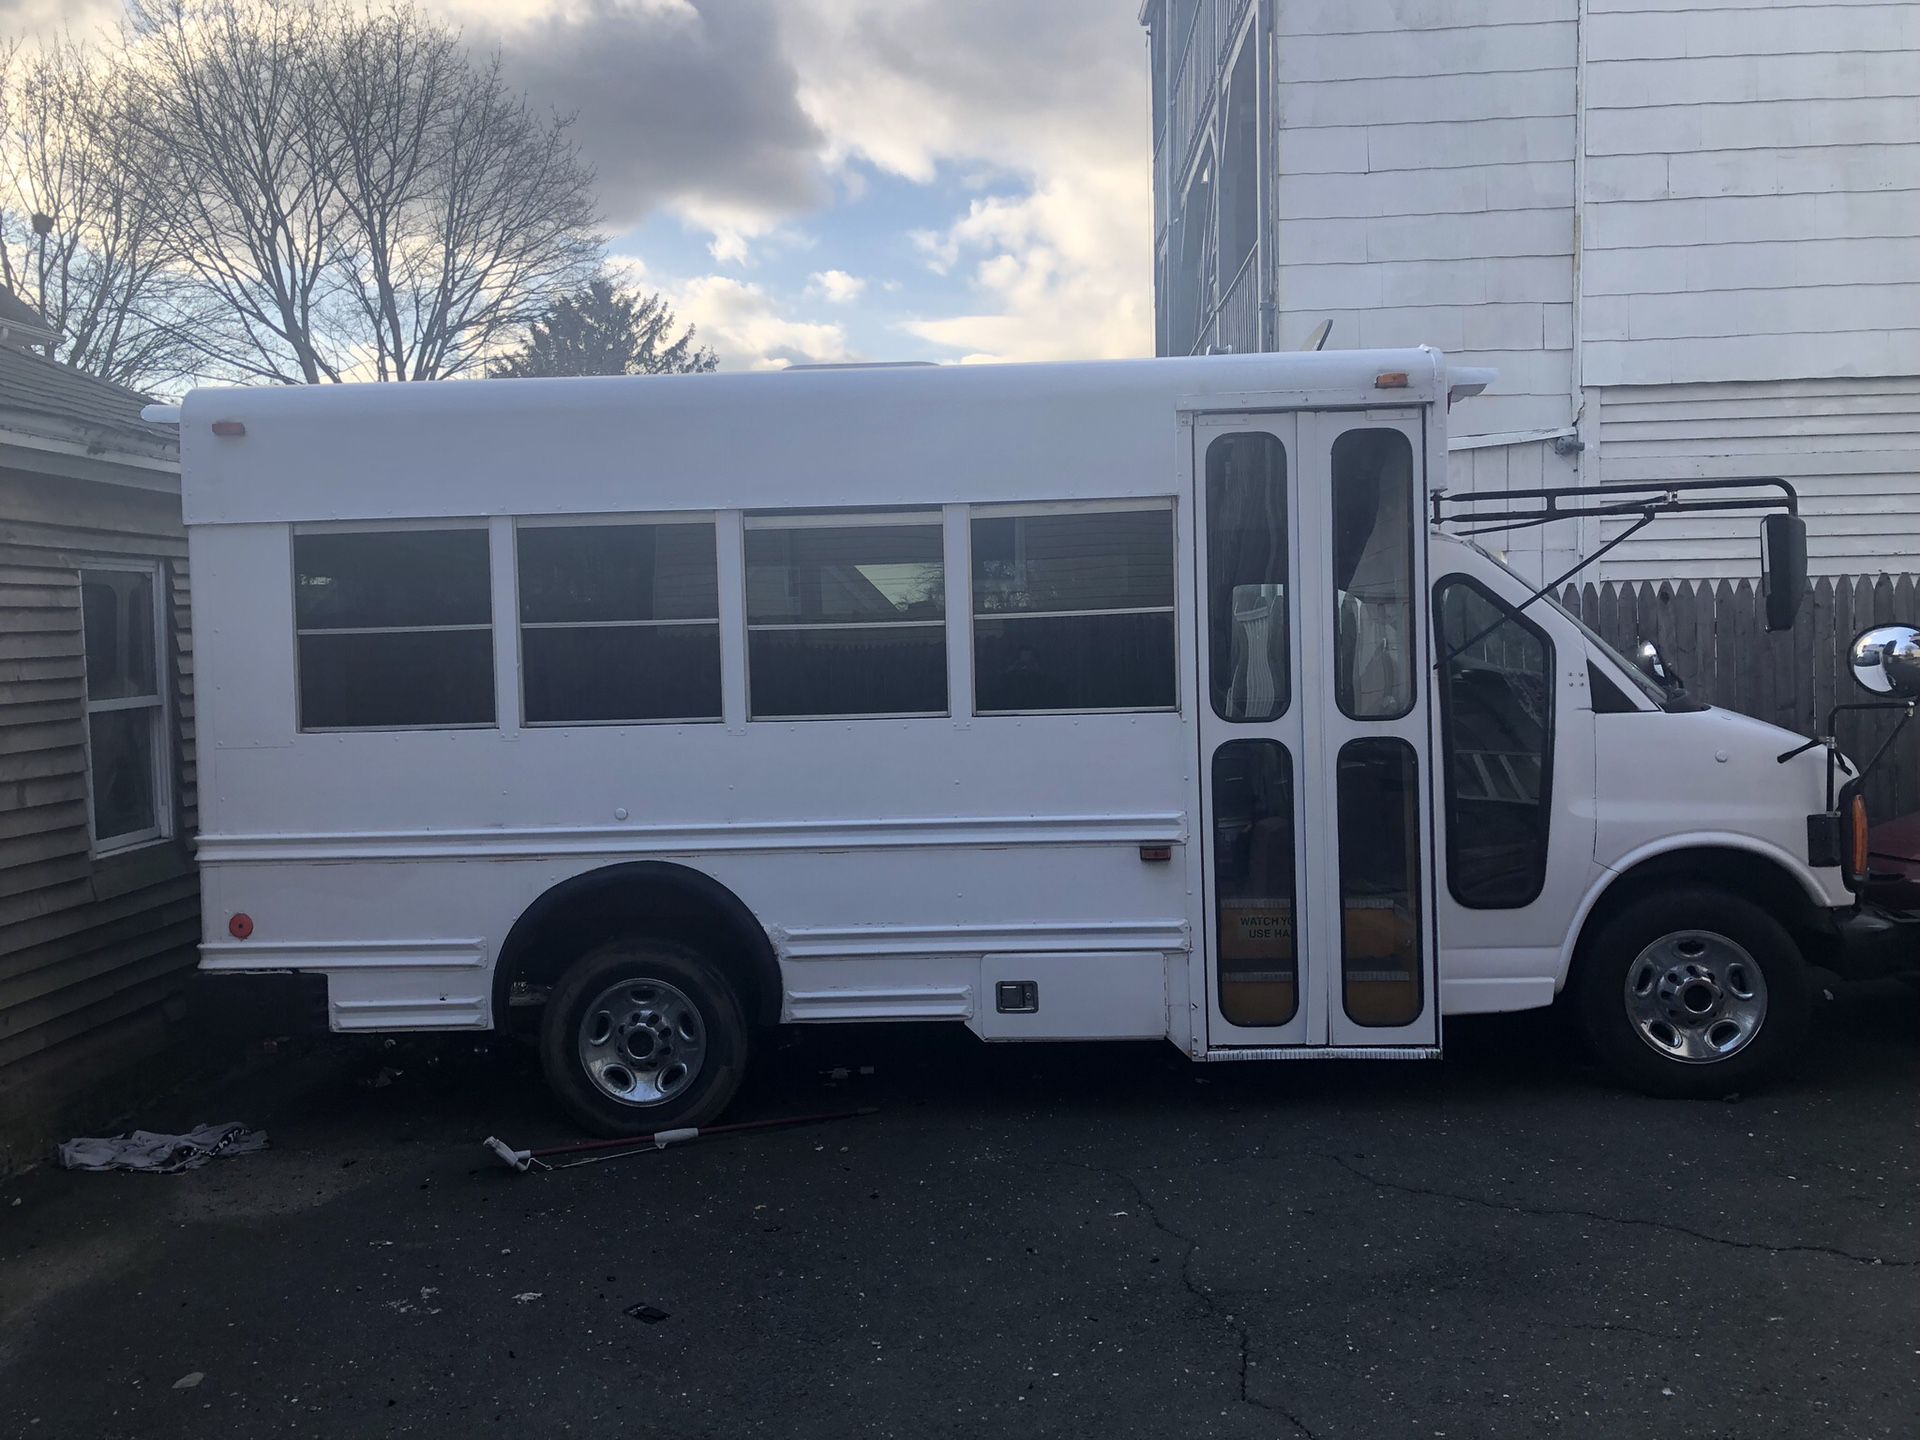 CHEV SCHBUSS 2002 Model CG31503 CYL 08 second owner.150 milles